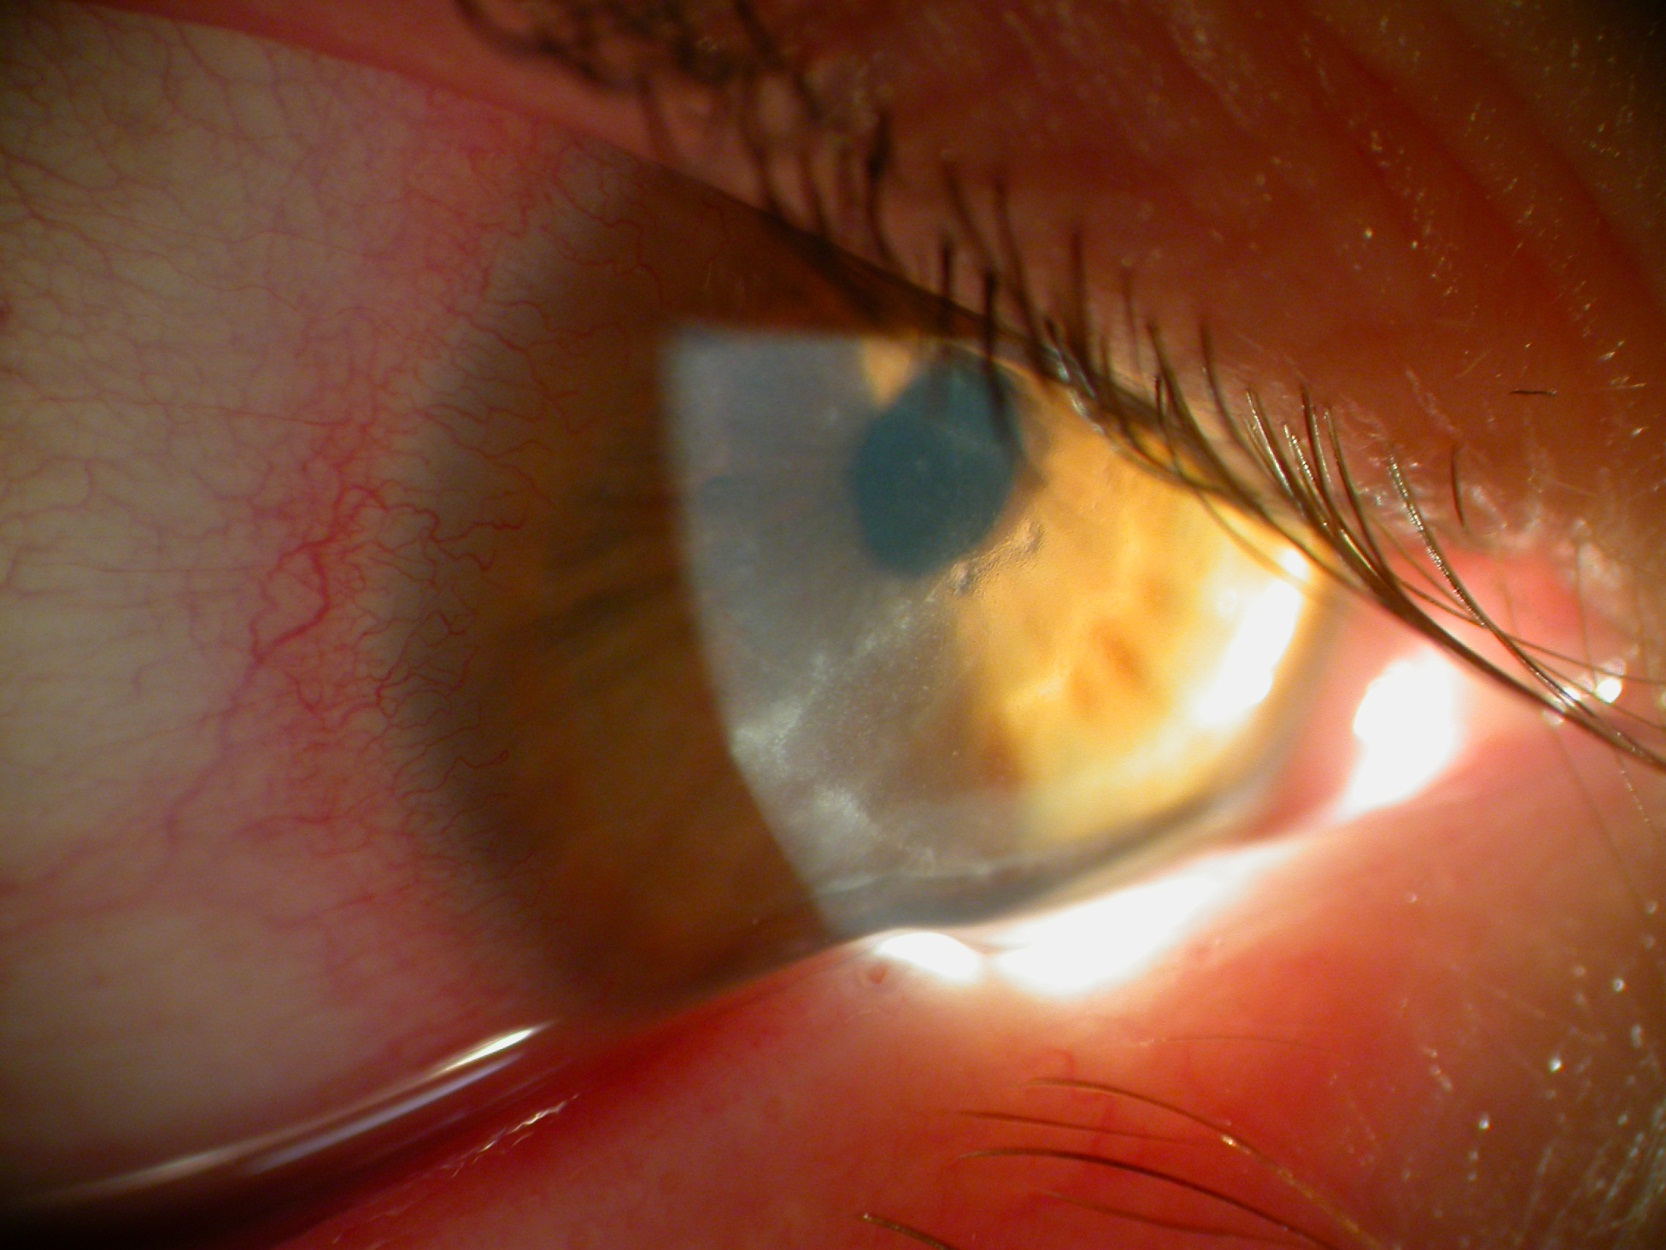 A close up of a person 's eye with a corneal ulcer caused by Acanthomeba